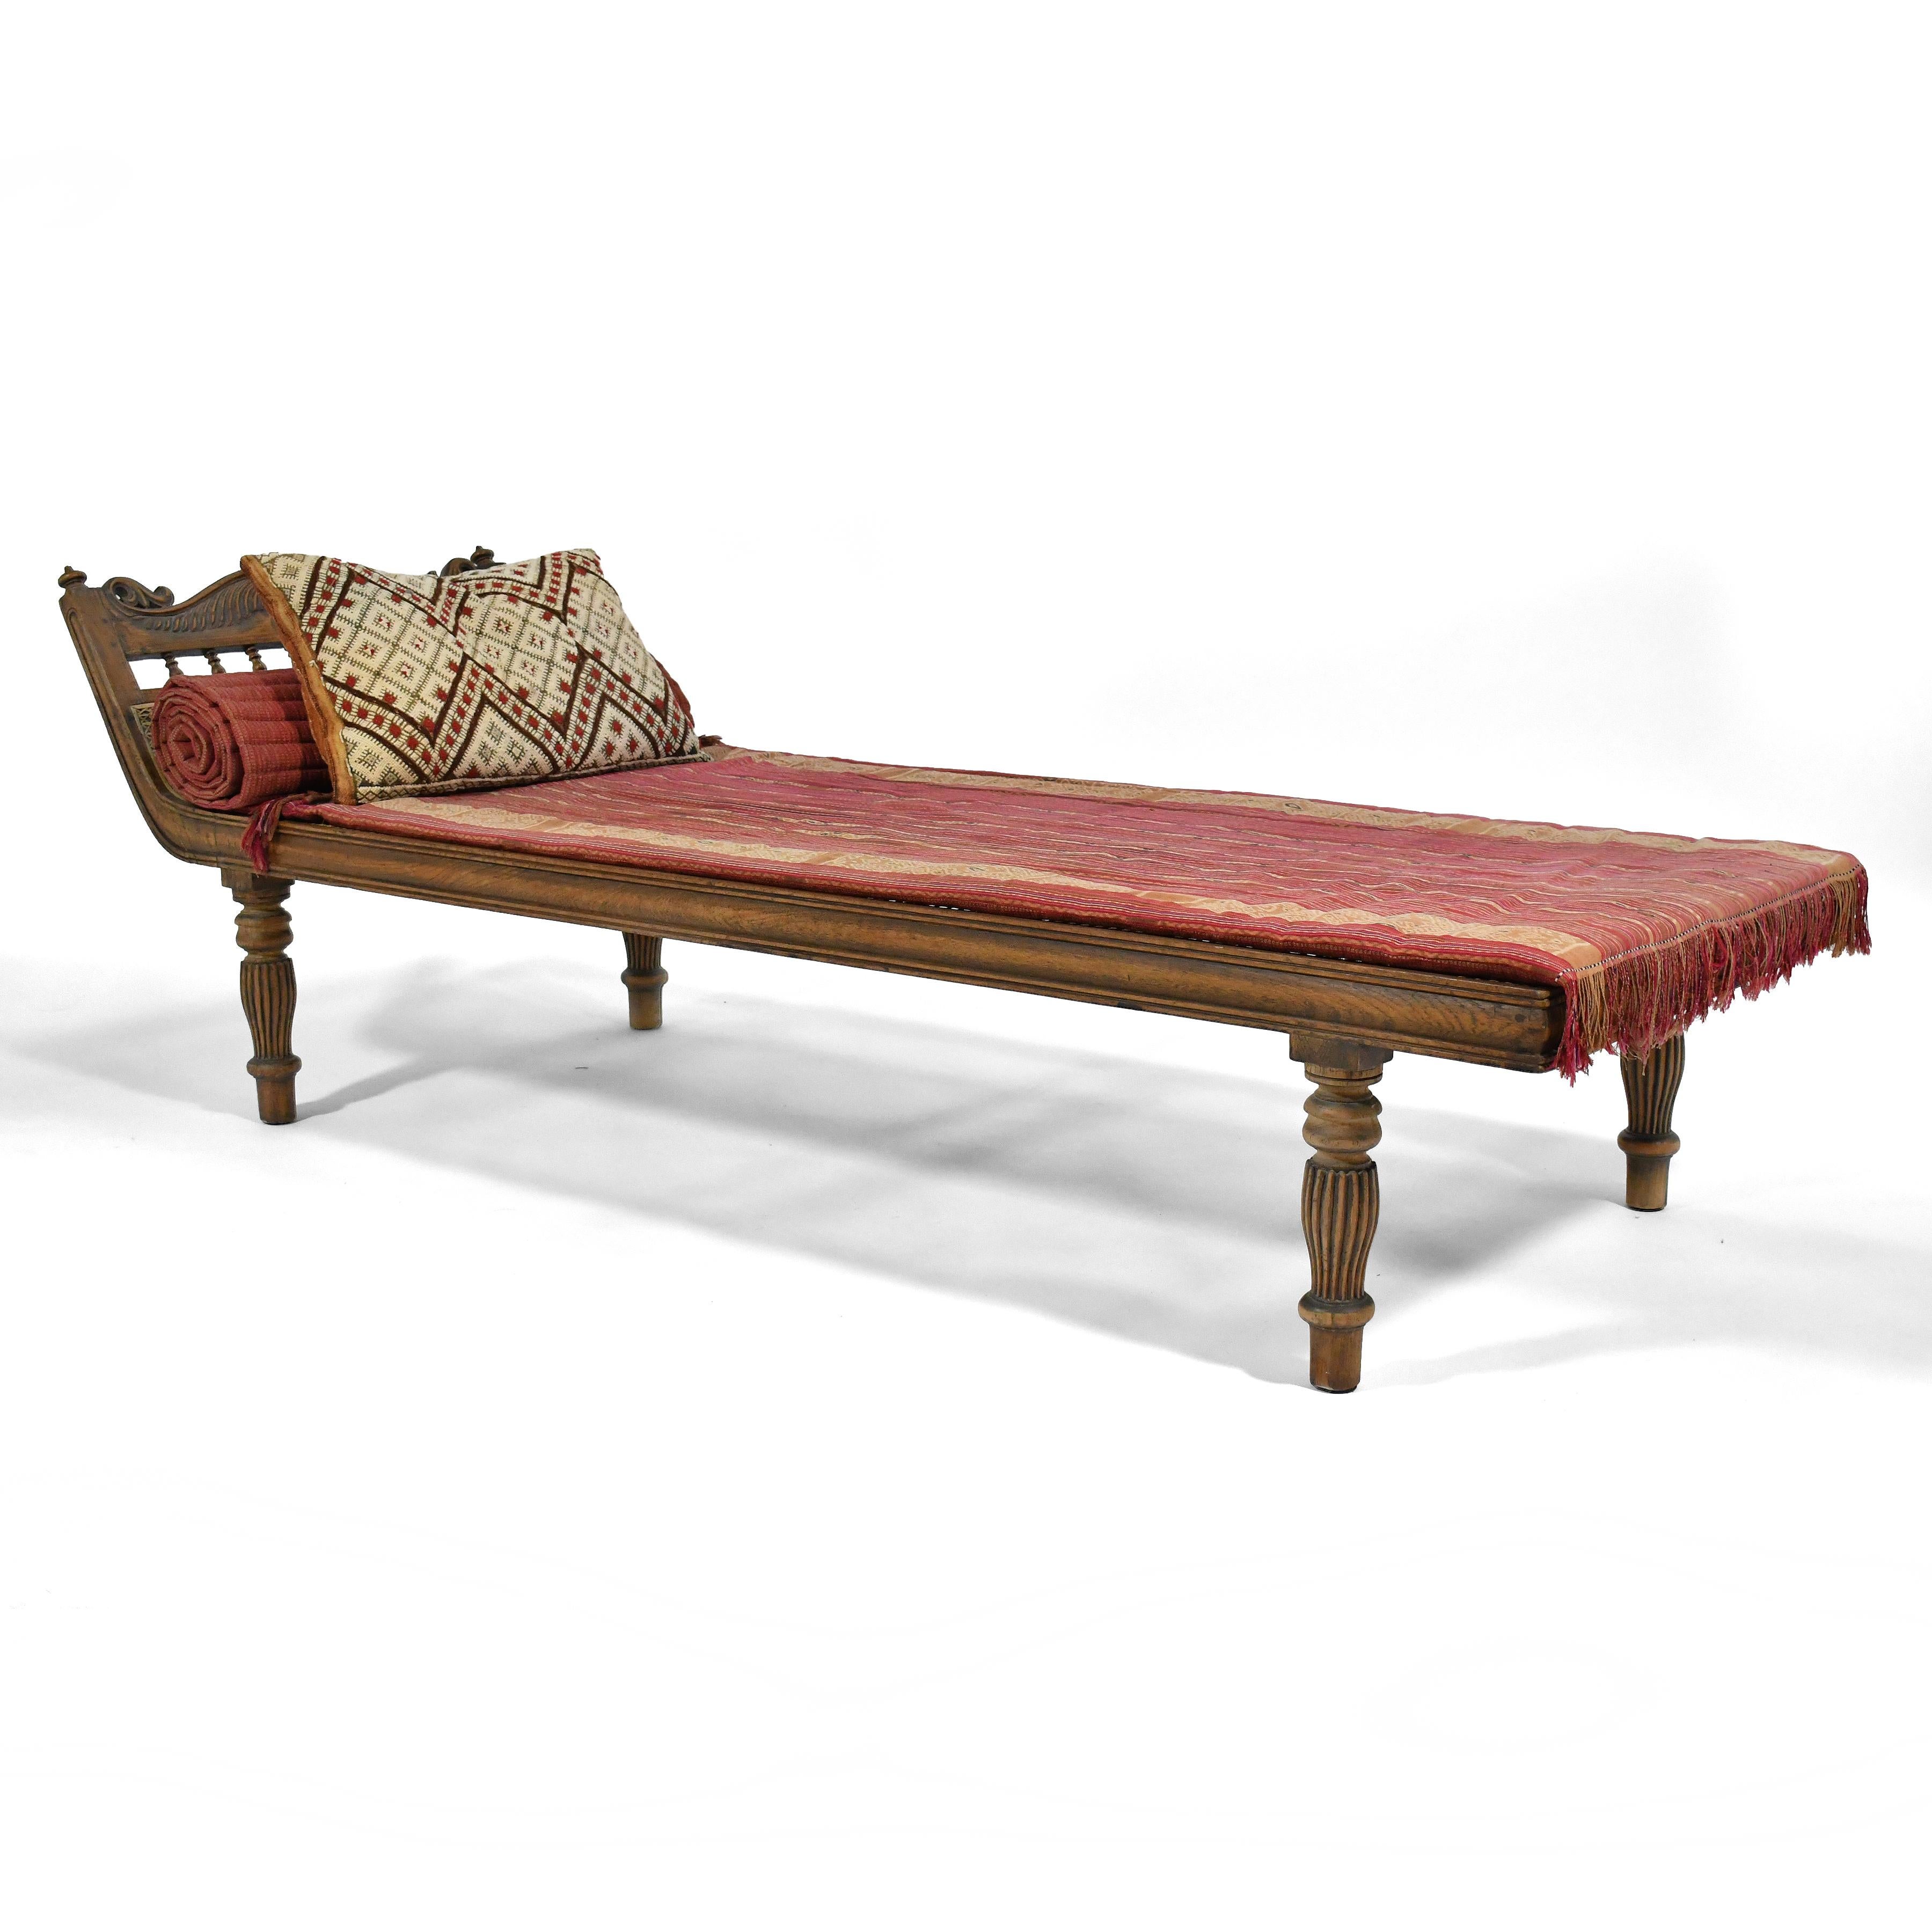 European Teak and Cane Colonial Chaise Lounge For Sale